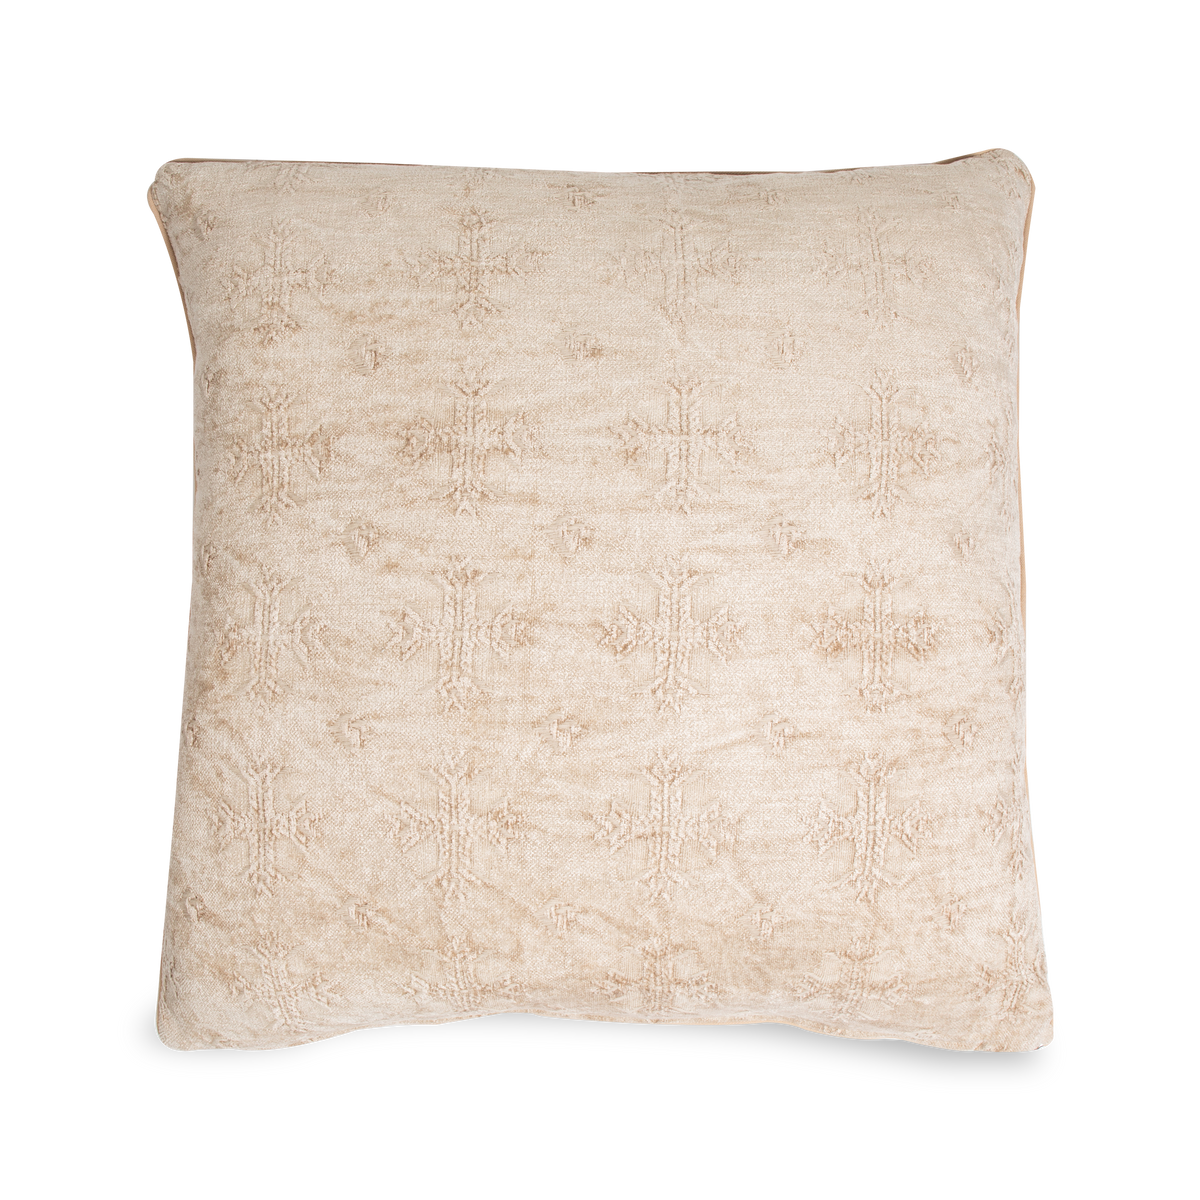 The Chenille Jacquard Pillow features elegant intricate patterns that adorn this soft, textured pillow.